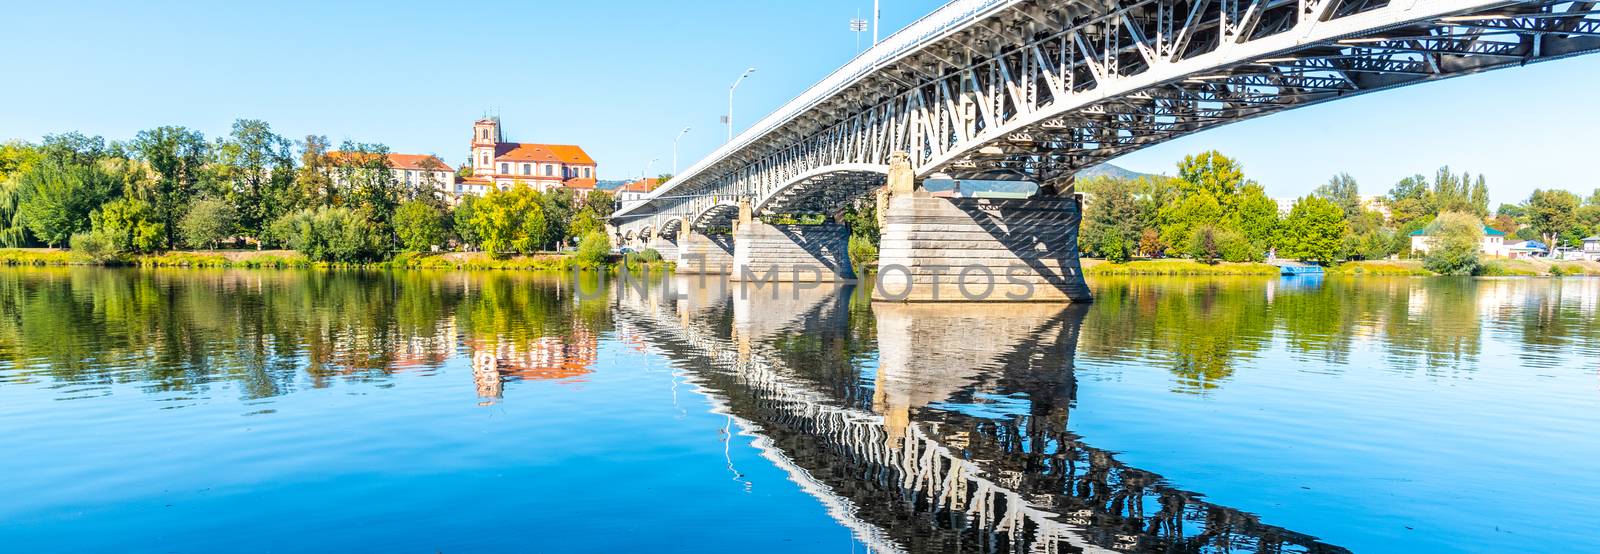 Tyrs Bridge over Labe River in Litomerice on sunny summer day, Czech Republic by pyty